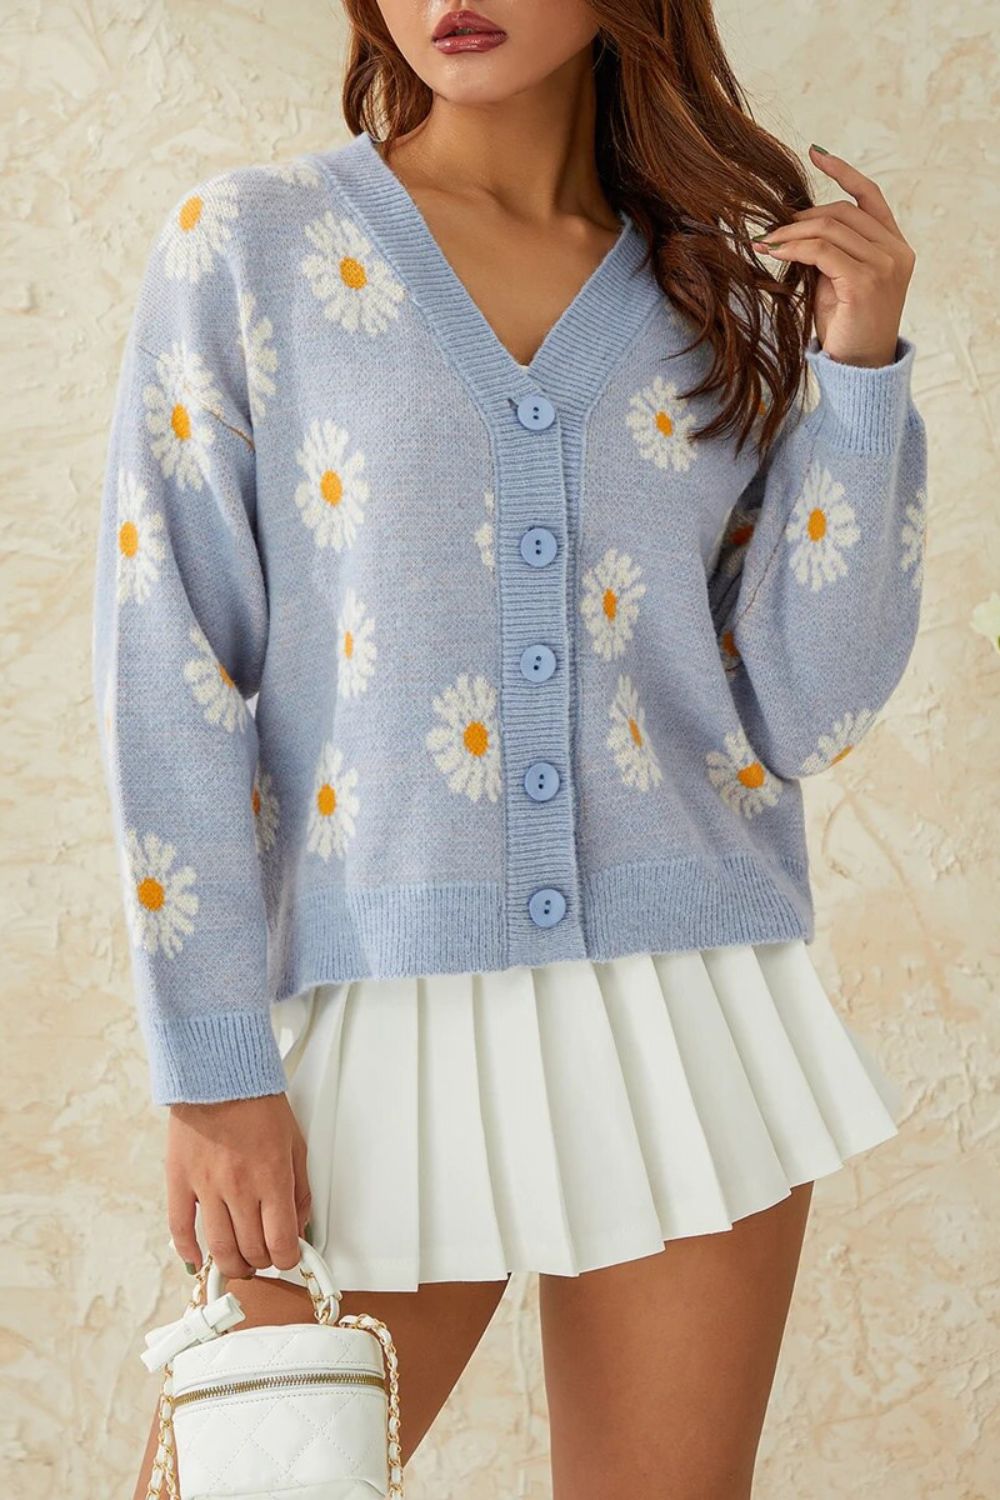 Trendy Women's Fashion V Neck Floral Printed Button Down Sweater GOMINGLO